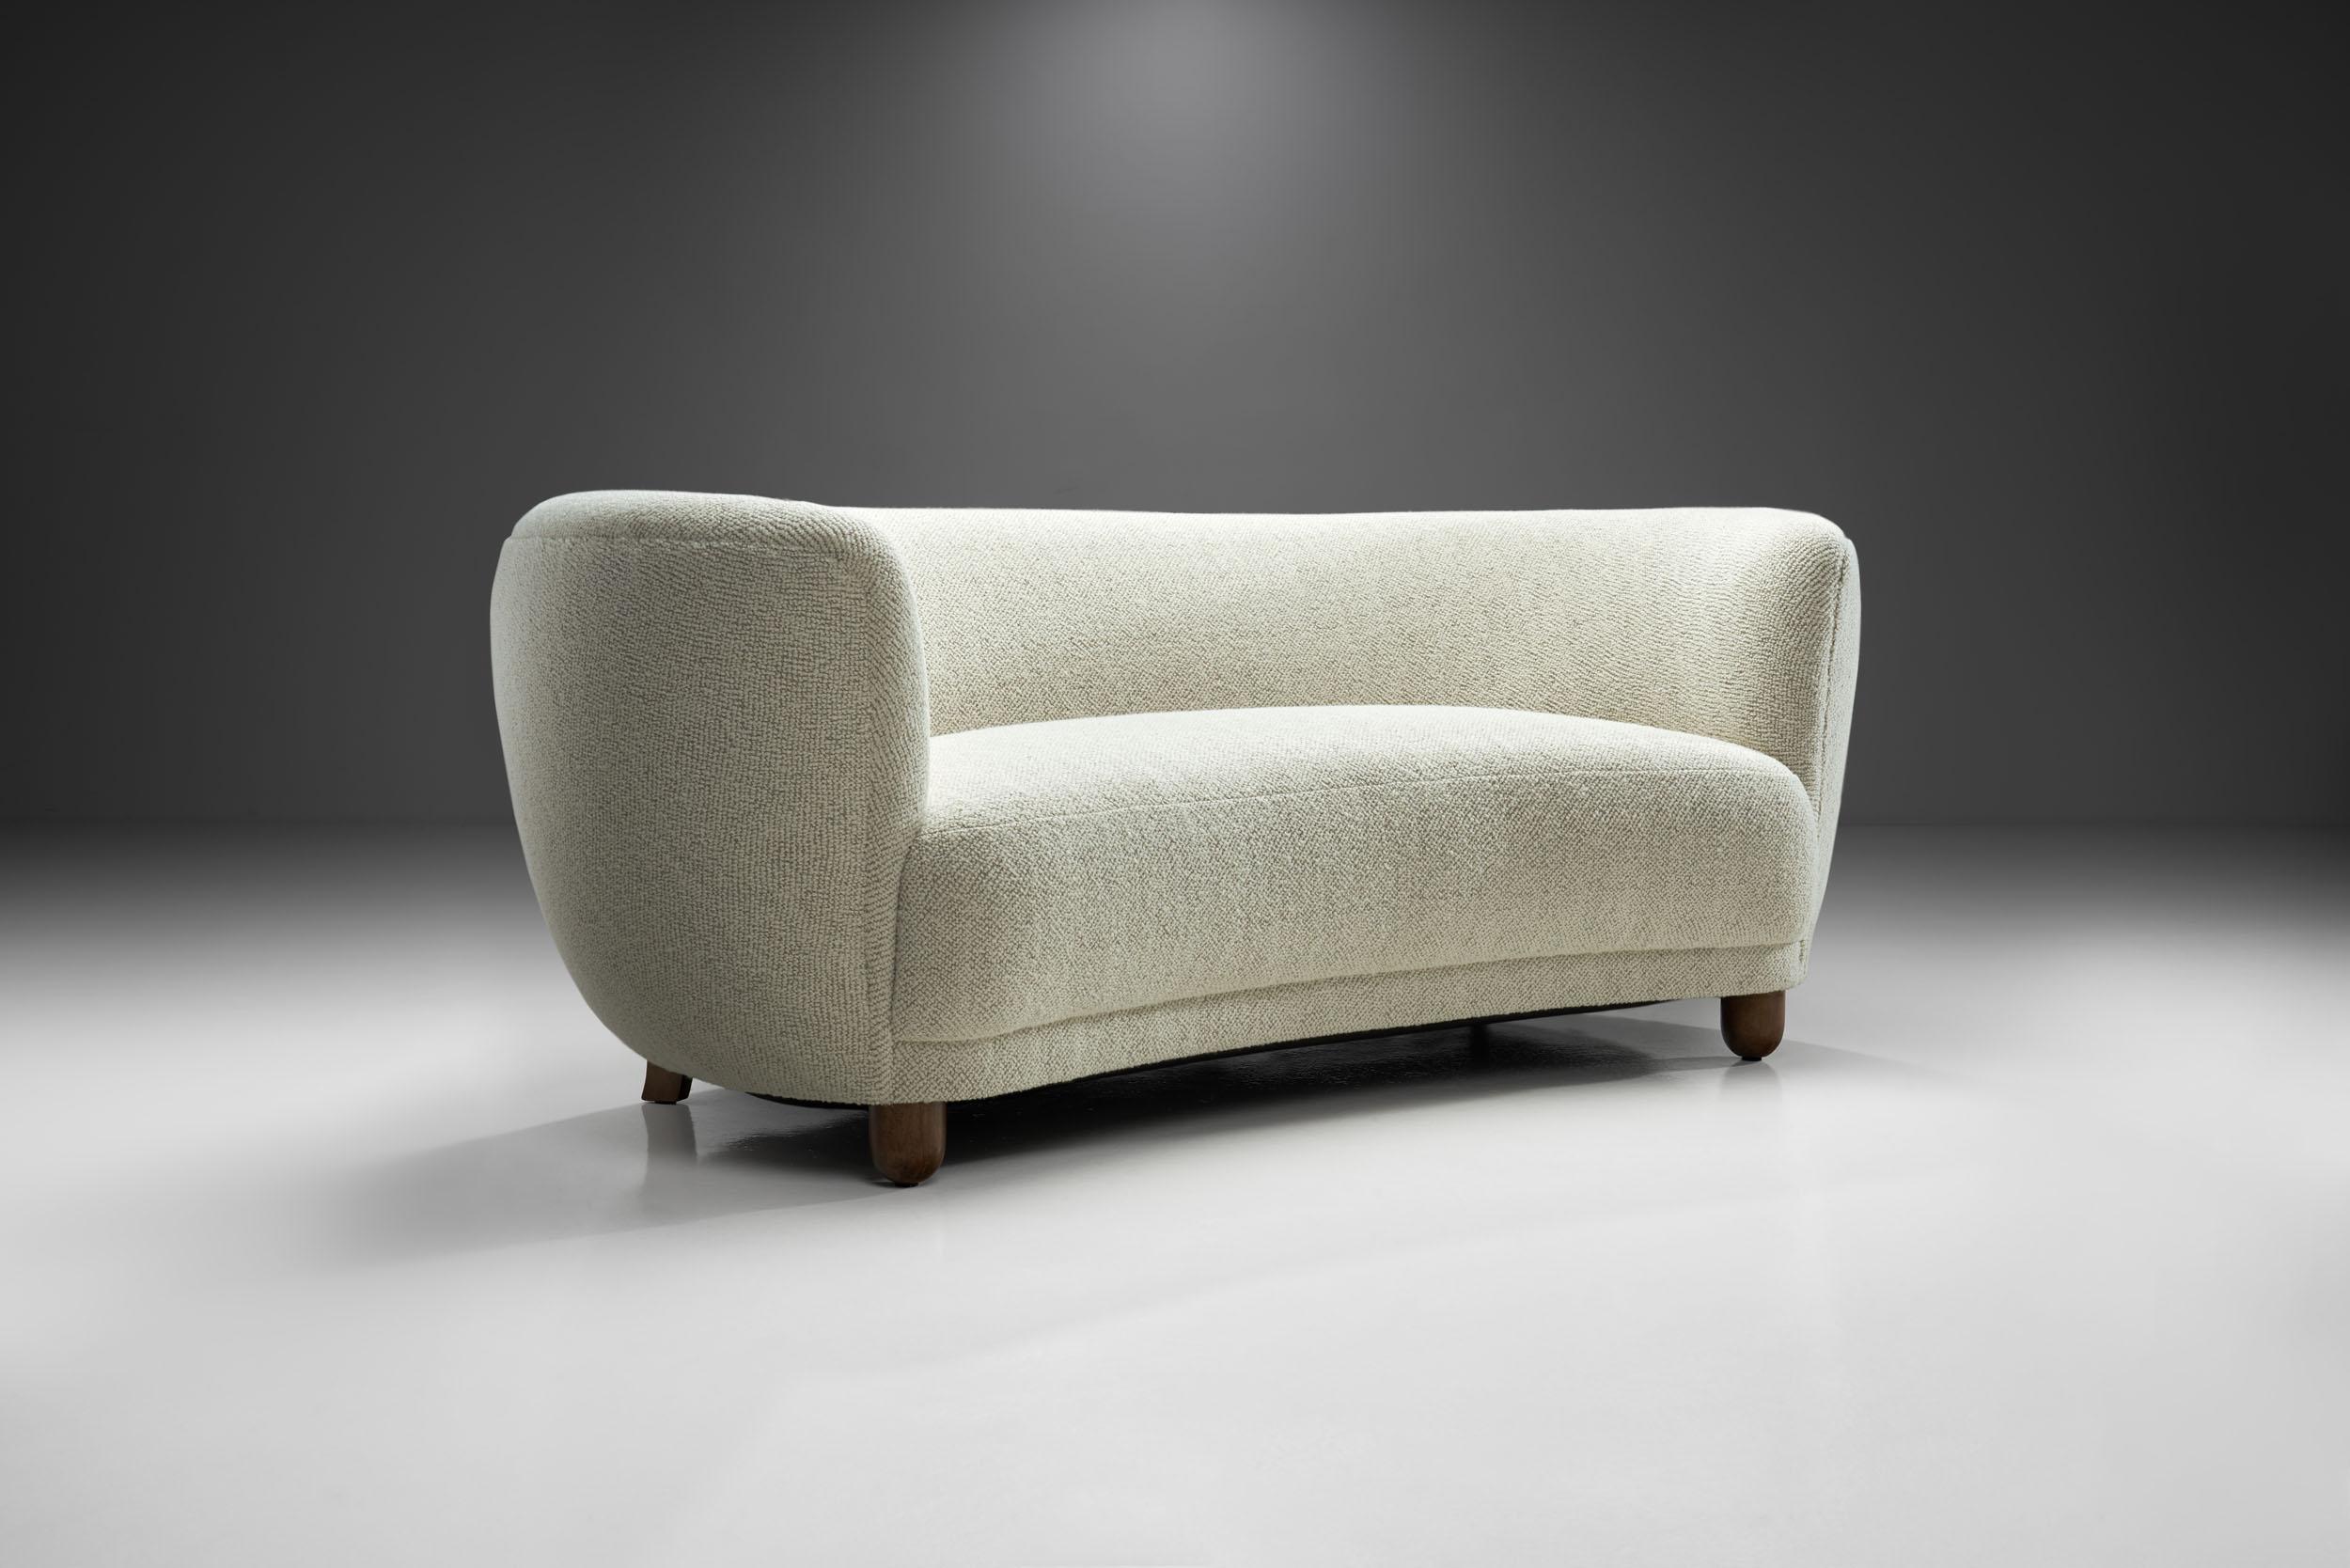 This beautiful Danish three-seater sofa recalls the Art Deco style of the 1930s with the recognisable touch of Danish Modernism. Thanks to its elegantly curved shape, this type of sofa is often referred to as the “banana” style.

Apart from the